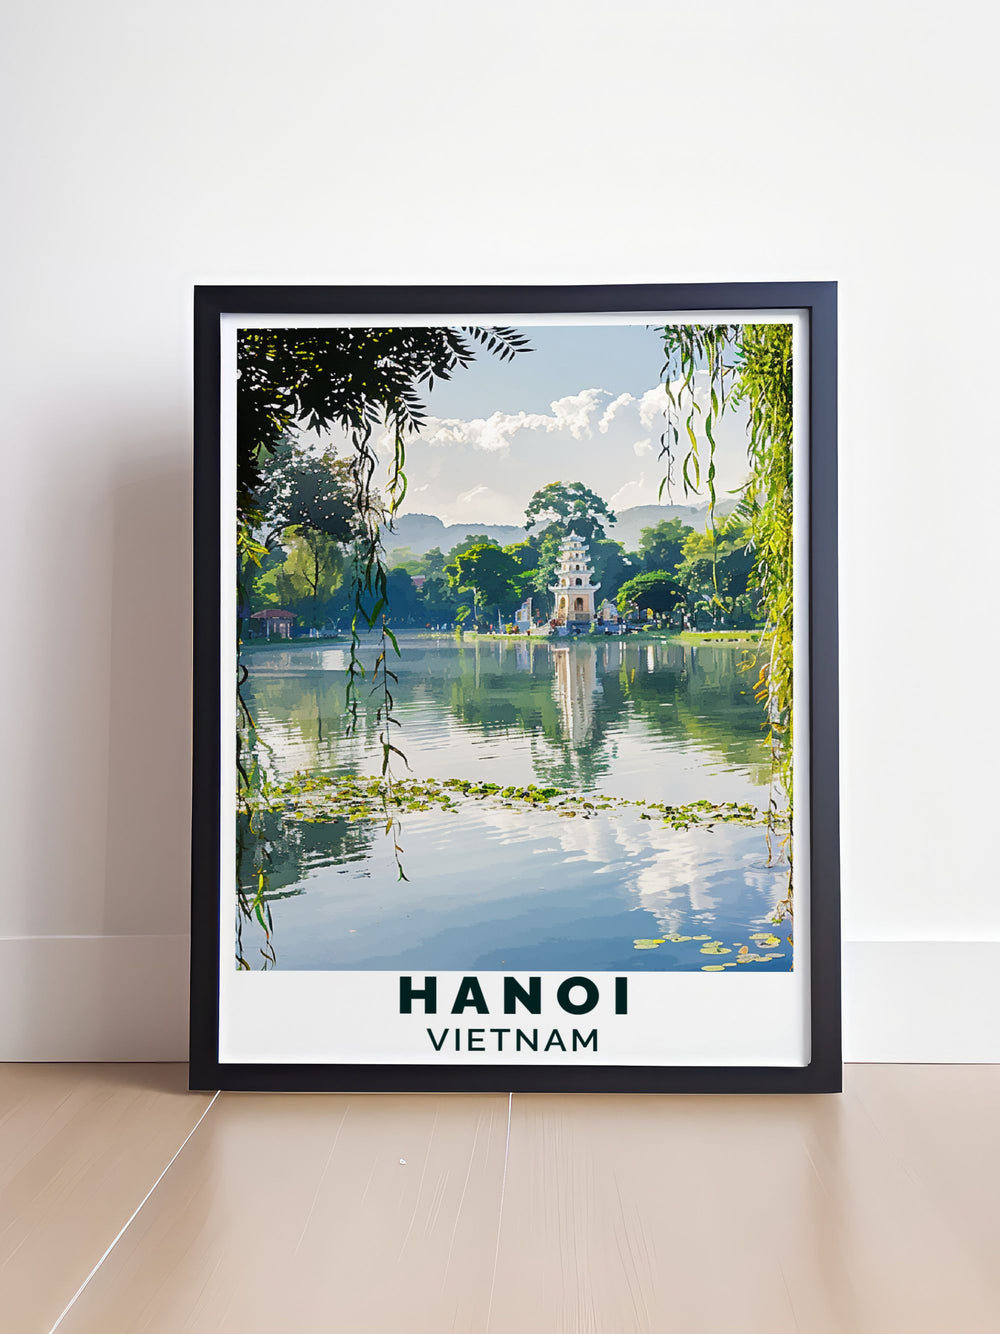 Featuring Hoan Kiem Lake, this art print showcases the tranquil environment and rich cultural heritage of one of Hanois most famous landmarks.